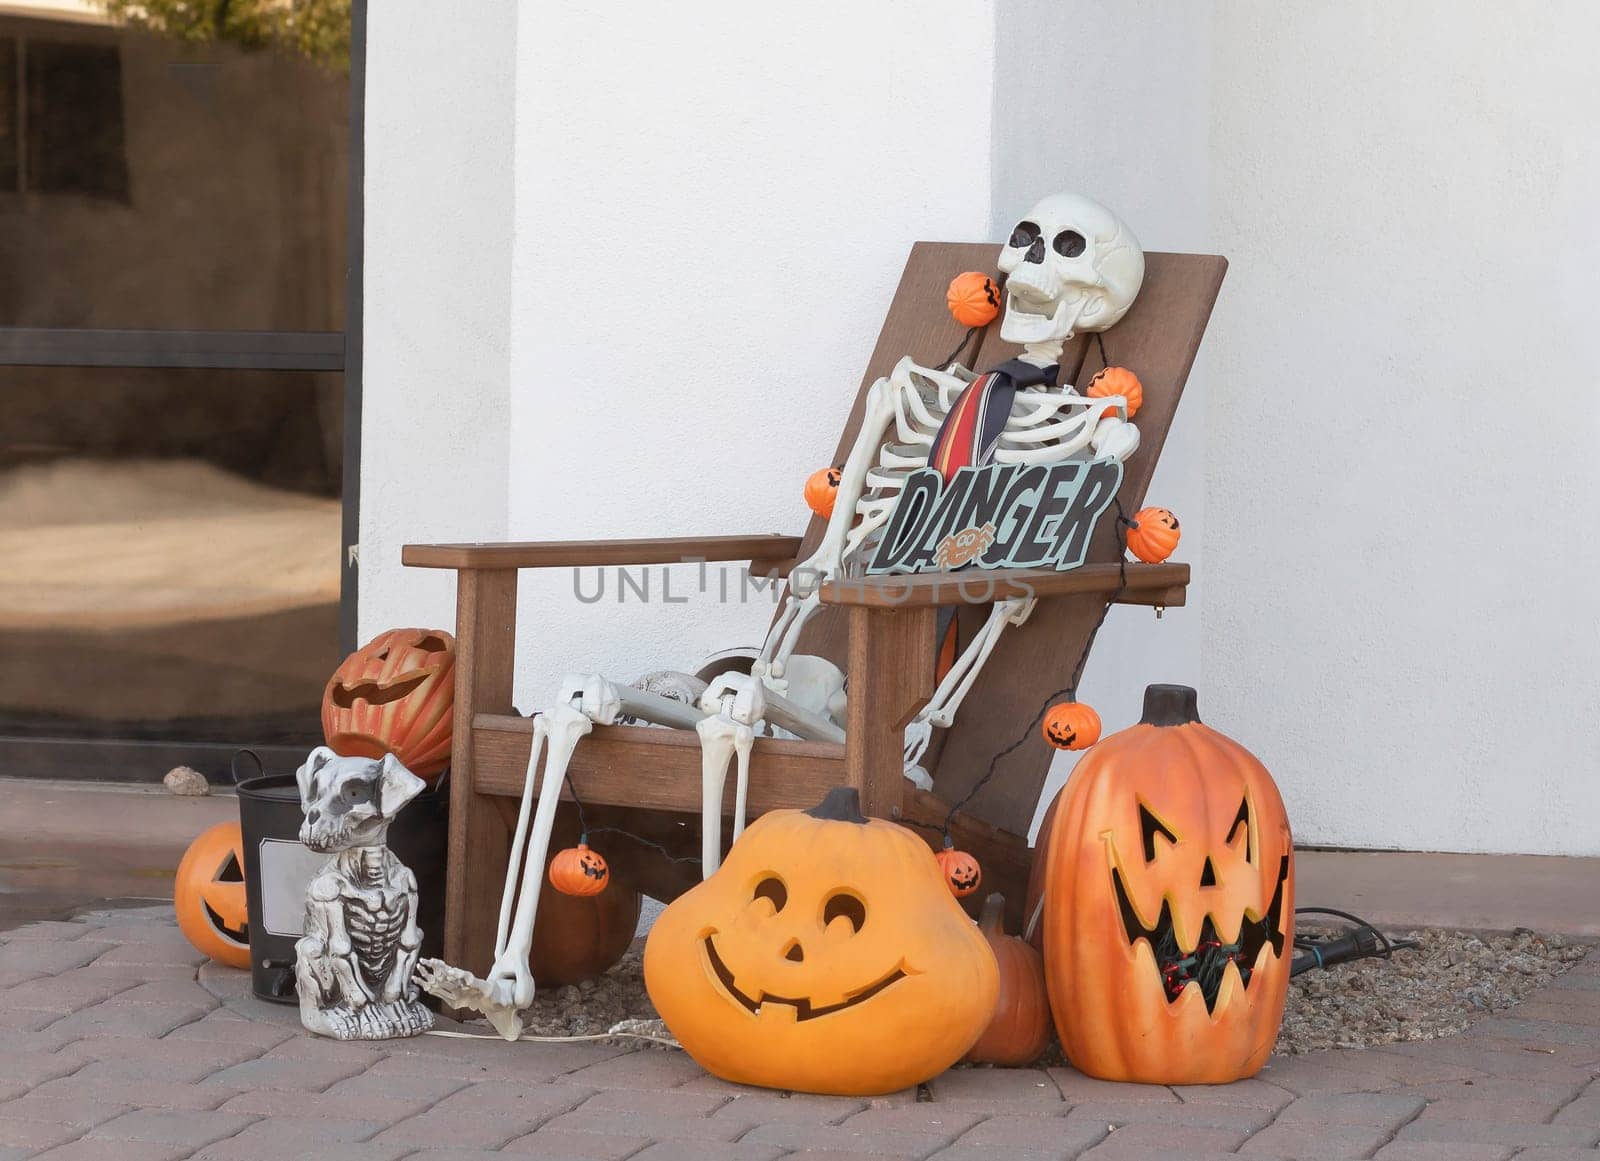 Skeleton In Chair, Pumpkins with Faces, Scary Dog And Skulls Are Traditional Attributes Of Halloween. Outdoor Decoration For Halloween Party. Horizontal Plane by netatsi